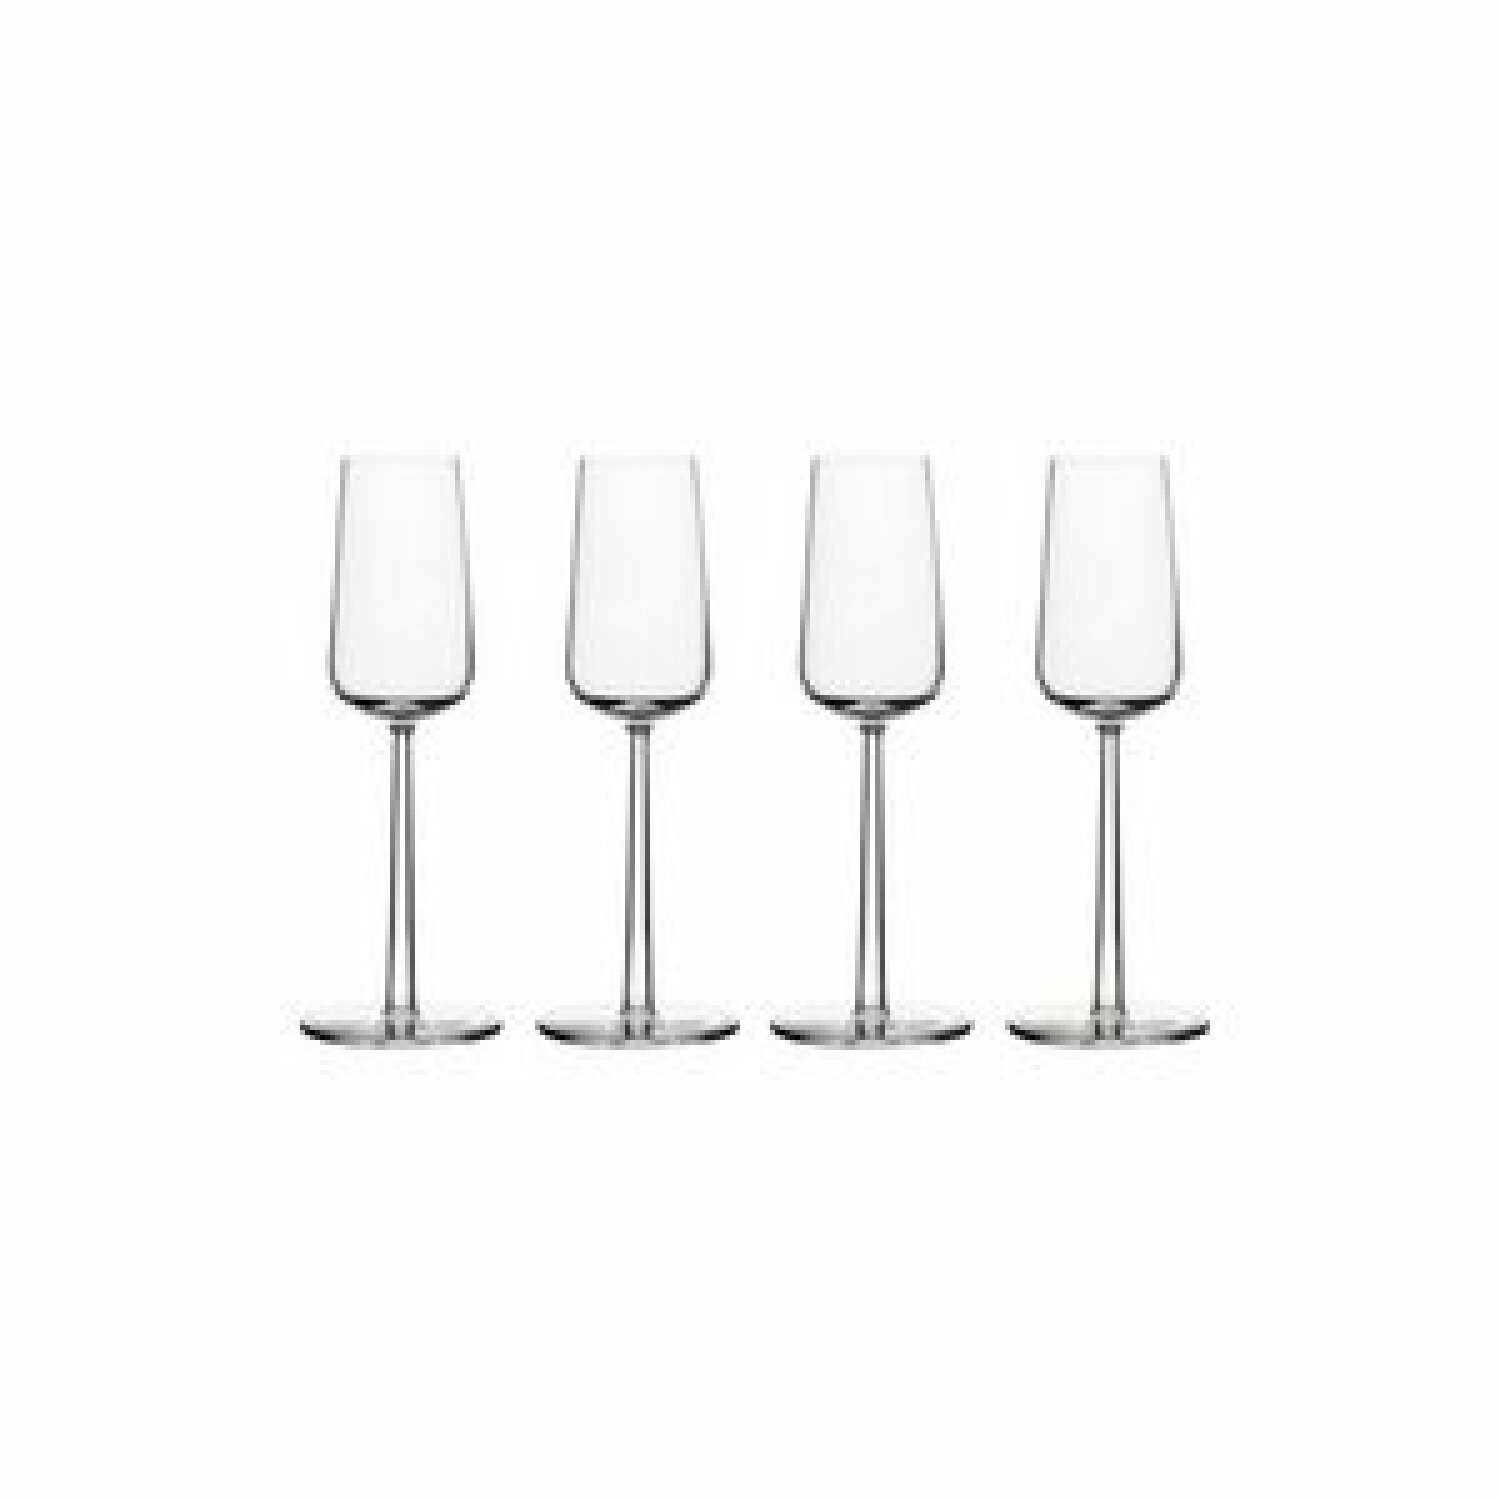 <a href="https://amzn.to/2CdmgkN" target="_blank" rel="noopener nofollow noreferrer">Champagne flutes</a>